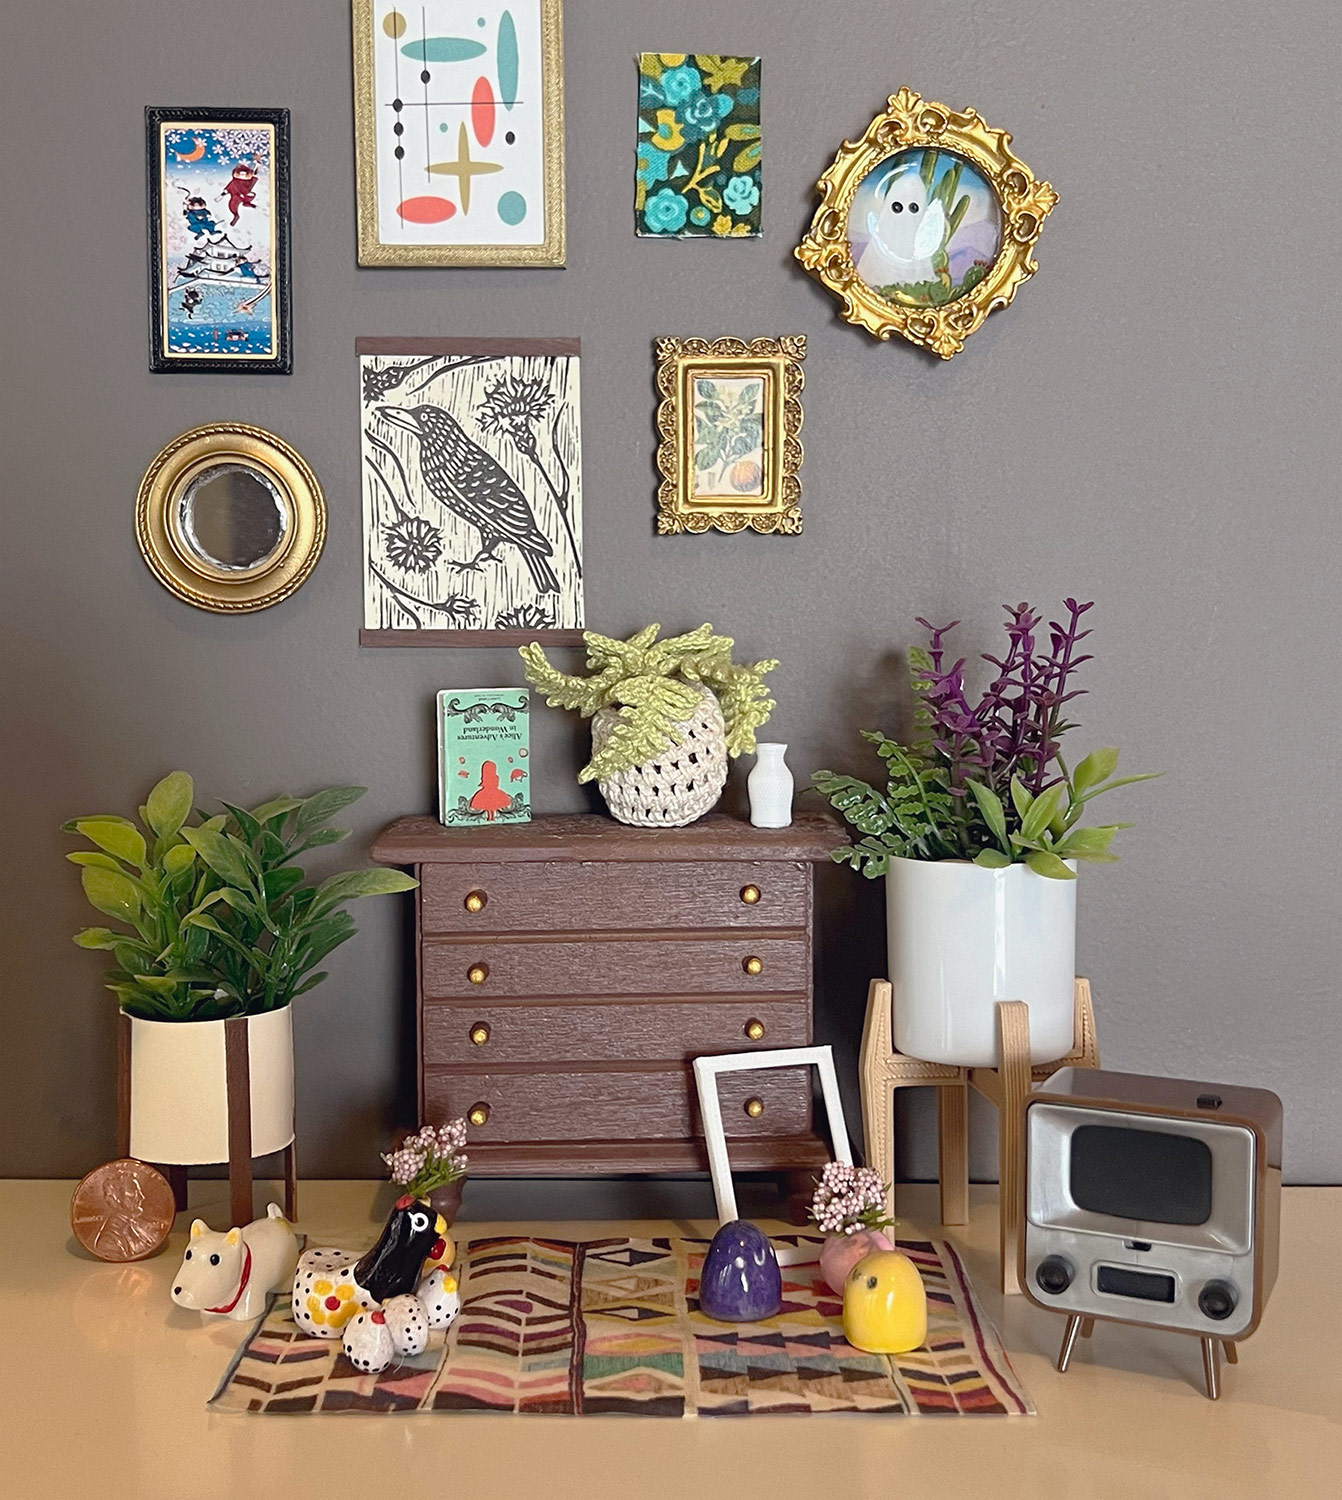 A cozy-looking minature living room placed on the shelf of a piece of normal-sized furniture. The living room has a tiny wooden dresser bureau with gold knobs. A book, vase, and a hand-knit potted fern sit atop the dresser. To the left and right of it are two potted plants, one reminiscent of a monstera and the other a snake plant. In front of the bureai is a small square of fabric decorated with abstract geometric shapes, serving as a carpet. Placed on the carpet are a mini white dog, a mini chicken with three even smaller chicks, two little blobs with smiley faces, and a tiny vase holding angel's breath flowers. There is Above the bureau is a proportinately small decorative mirror and five pieces of art, some with ornate golden frames. In front of the bureau and to the left of the carpet is the tiny TV. It looks like how a TV from the 1940s might, with a large boxy frame, faux wood exterior, and a front metal speaker grill flanked by two control dials. The TV's frame is also held up off the ground via four small faux wooden legs. Finally, a penny is placed on the side of the carpet opposite of the TV, to better communicate the sense of scale.